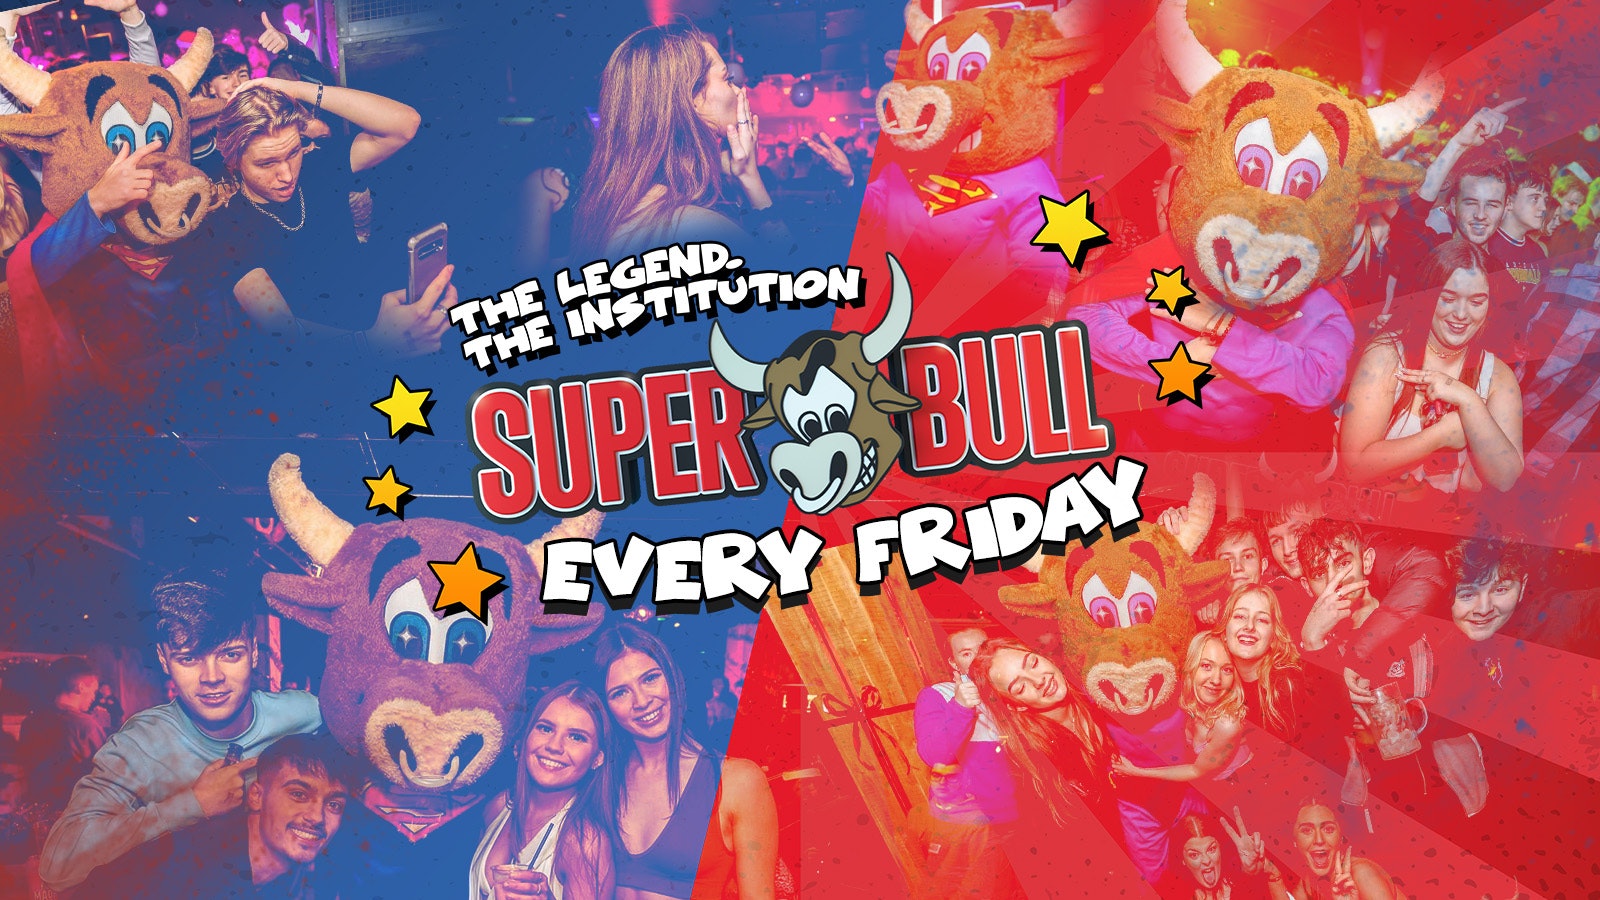 The Superbull – The Legend. The Institution – Fri 3rd May